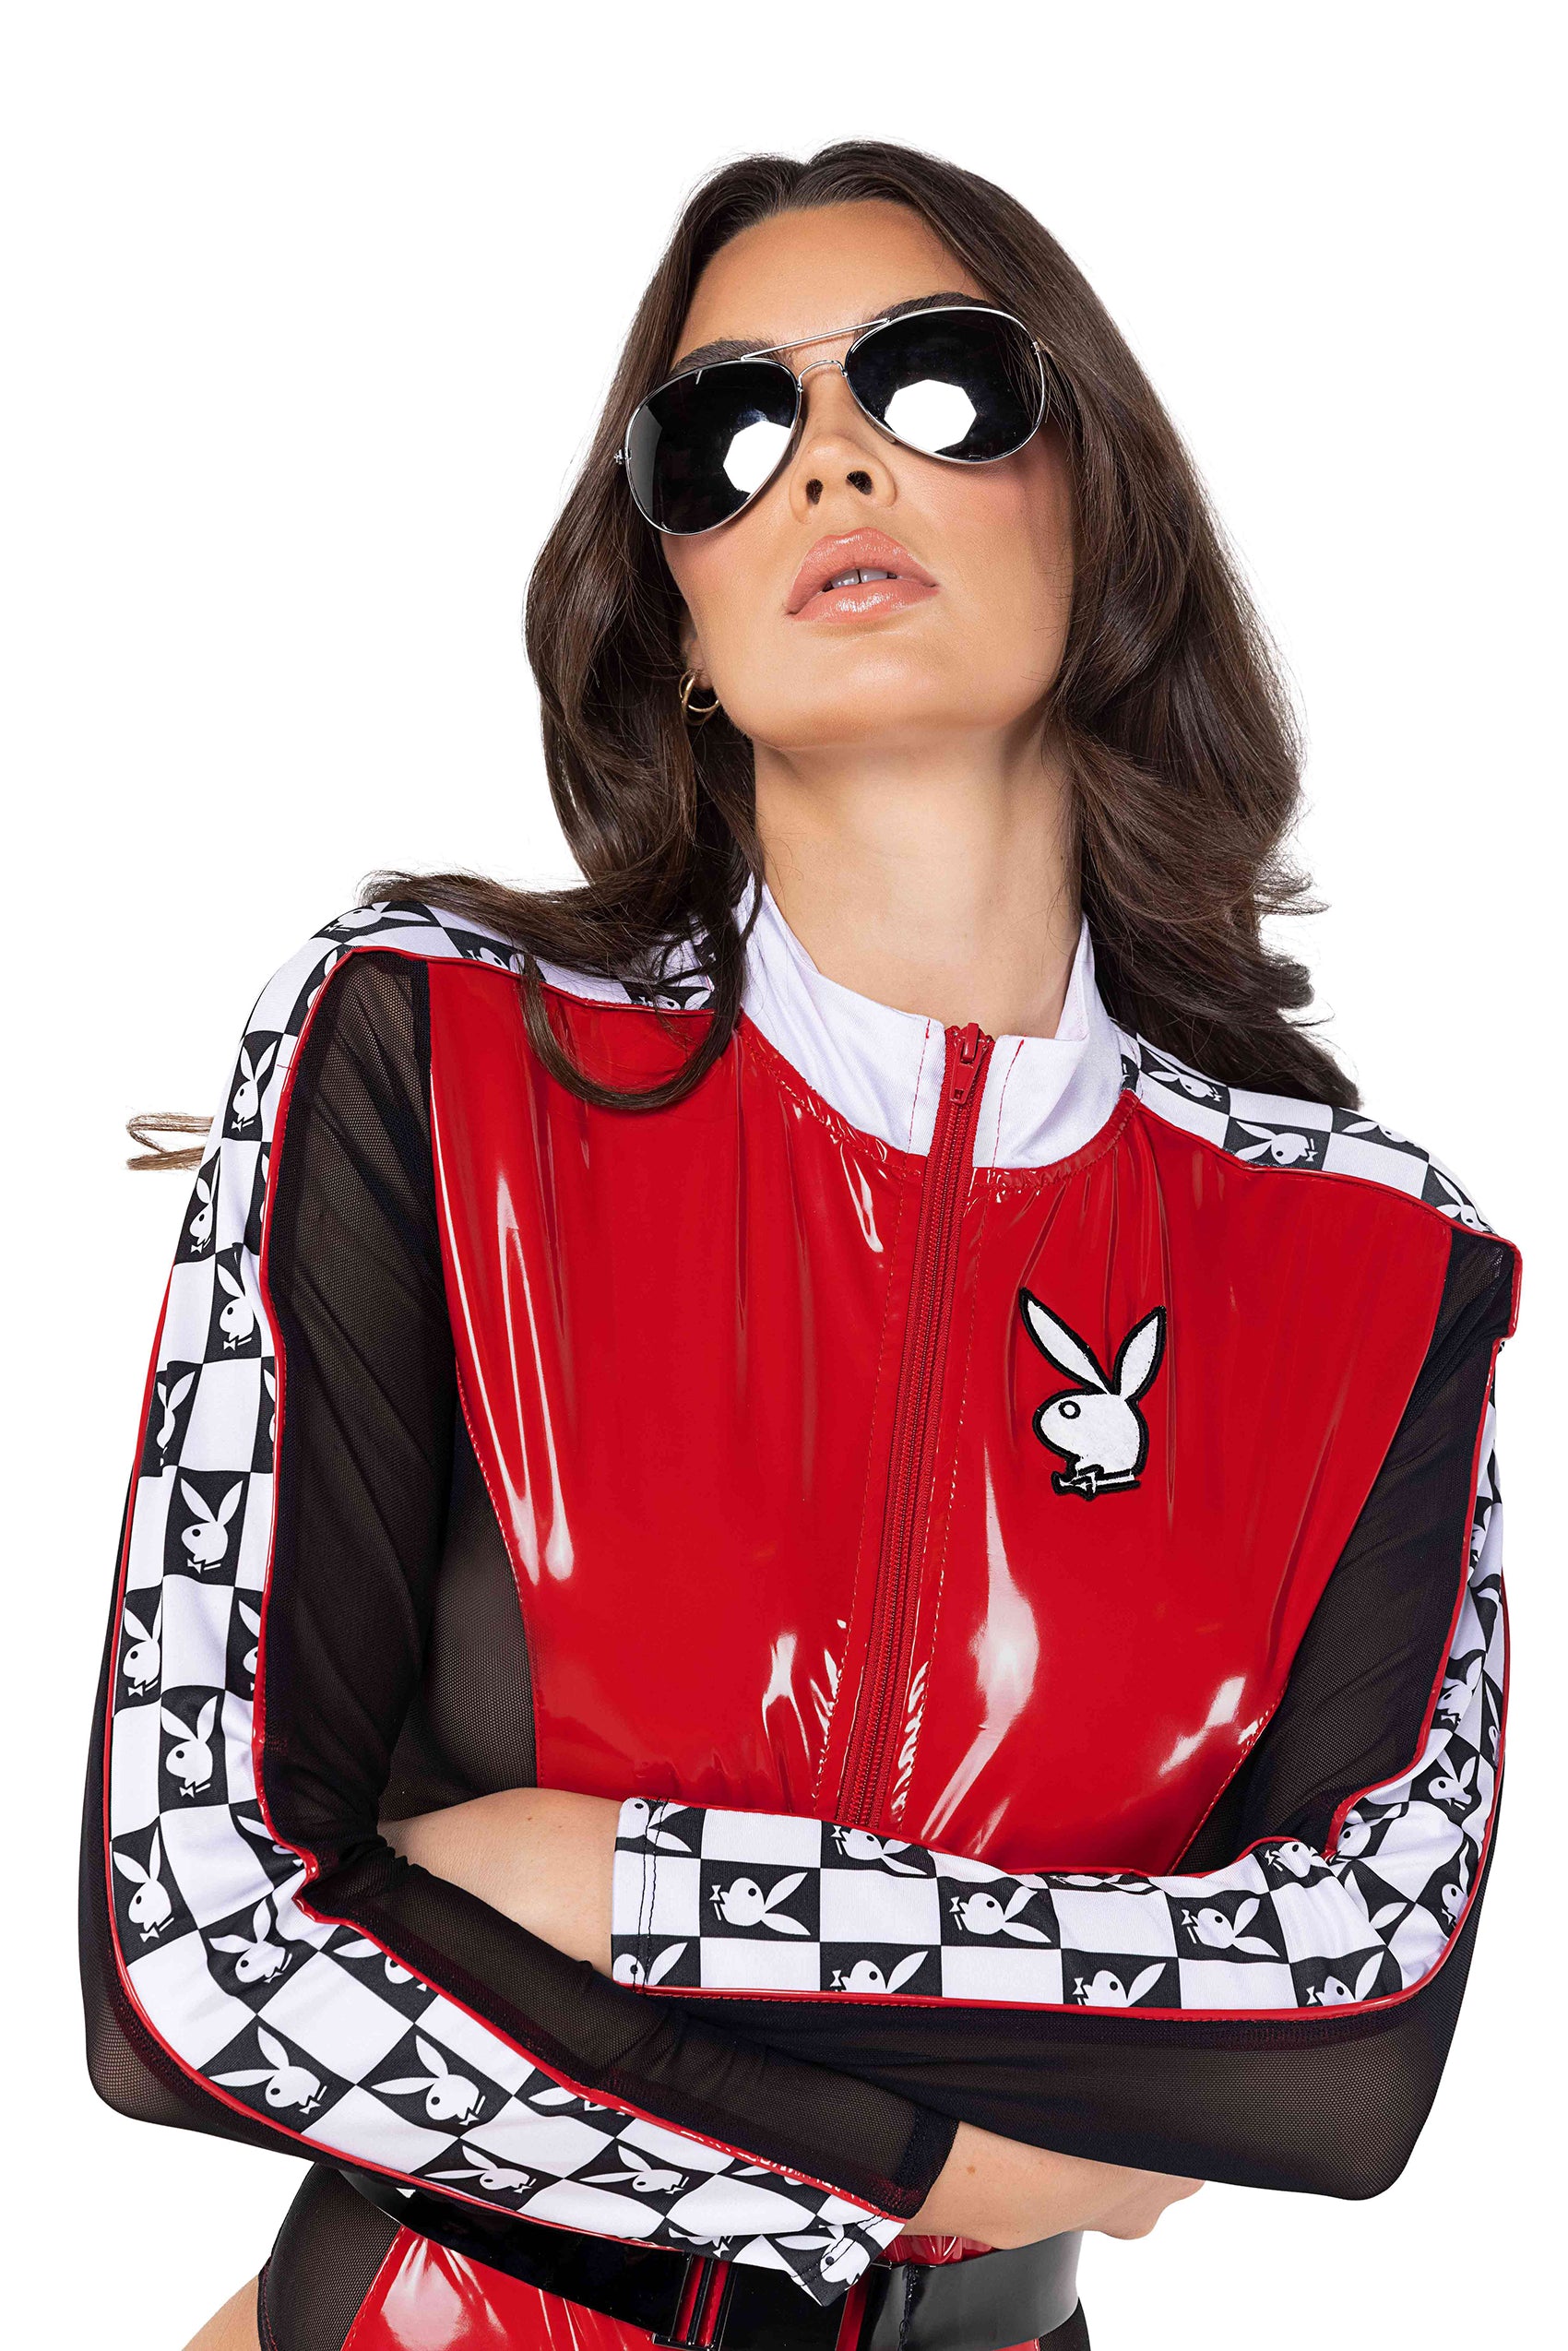 Playboy Race Car driver Costume by ROMA in Size S, M, L, XL, 1X, or 2X